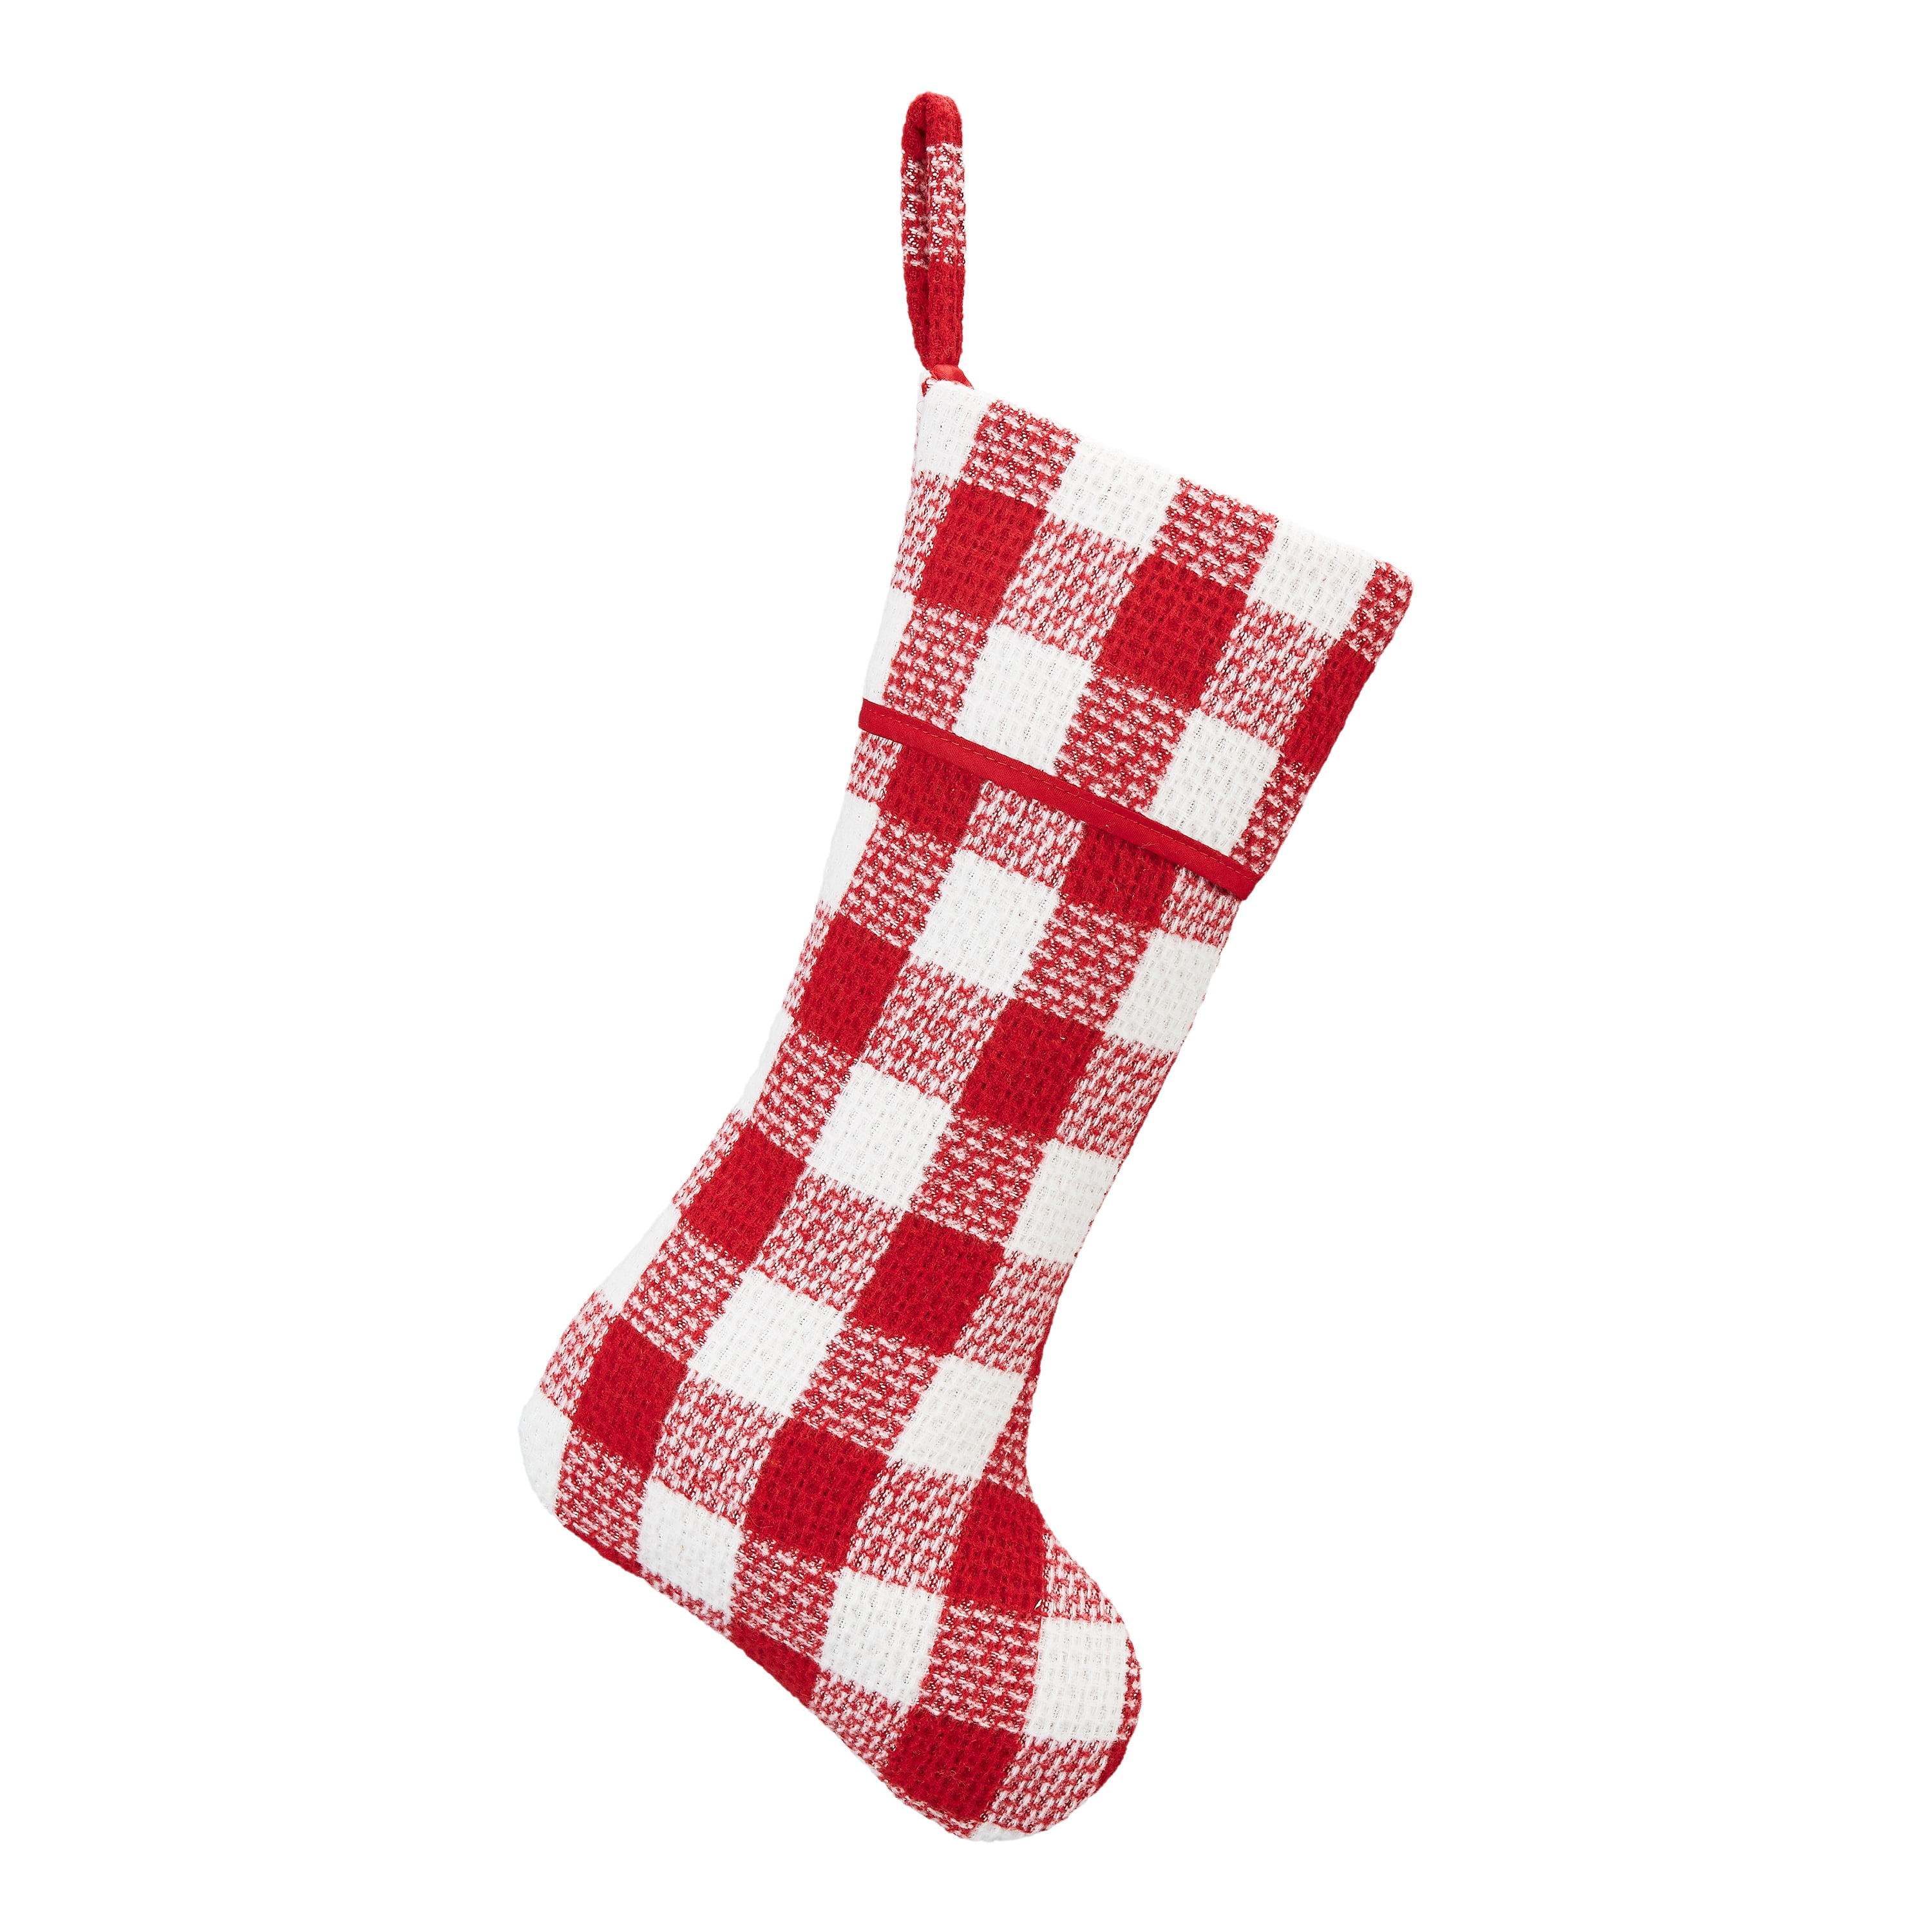 Details about   Buffalo Check Knit Stocking Choose Either Black And Red or Black And White 23 1/ 